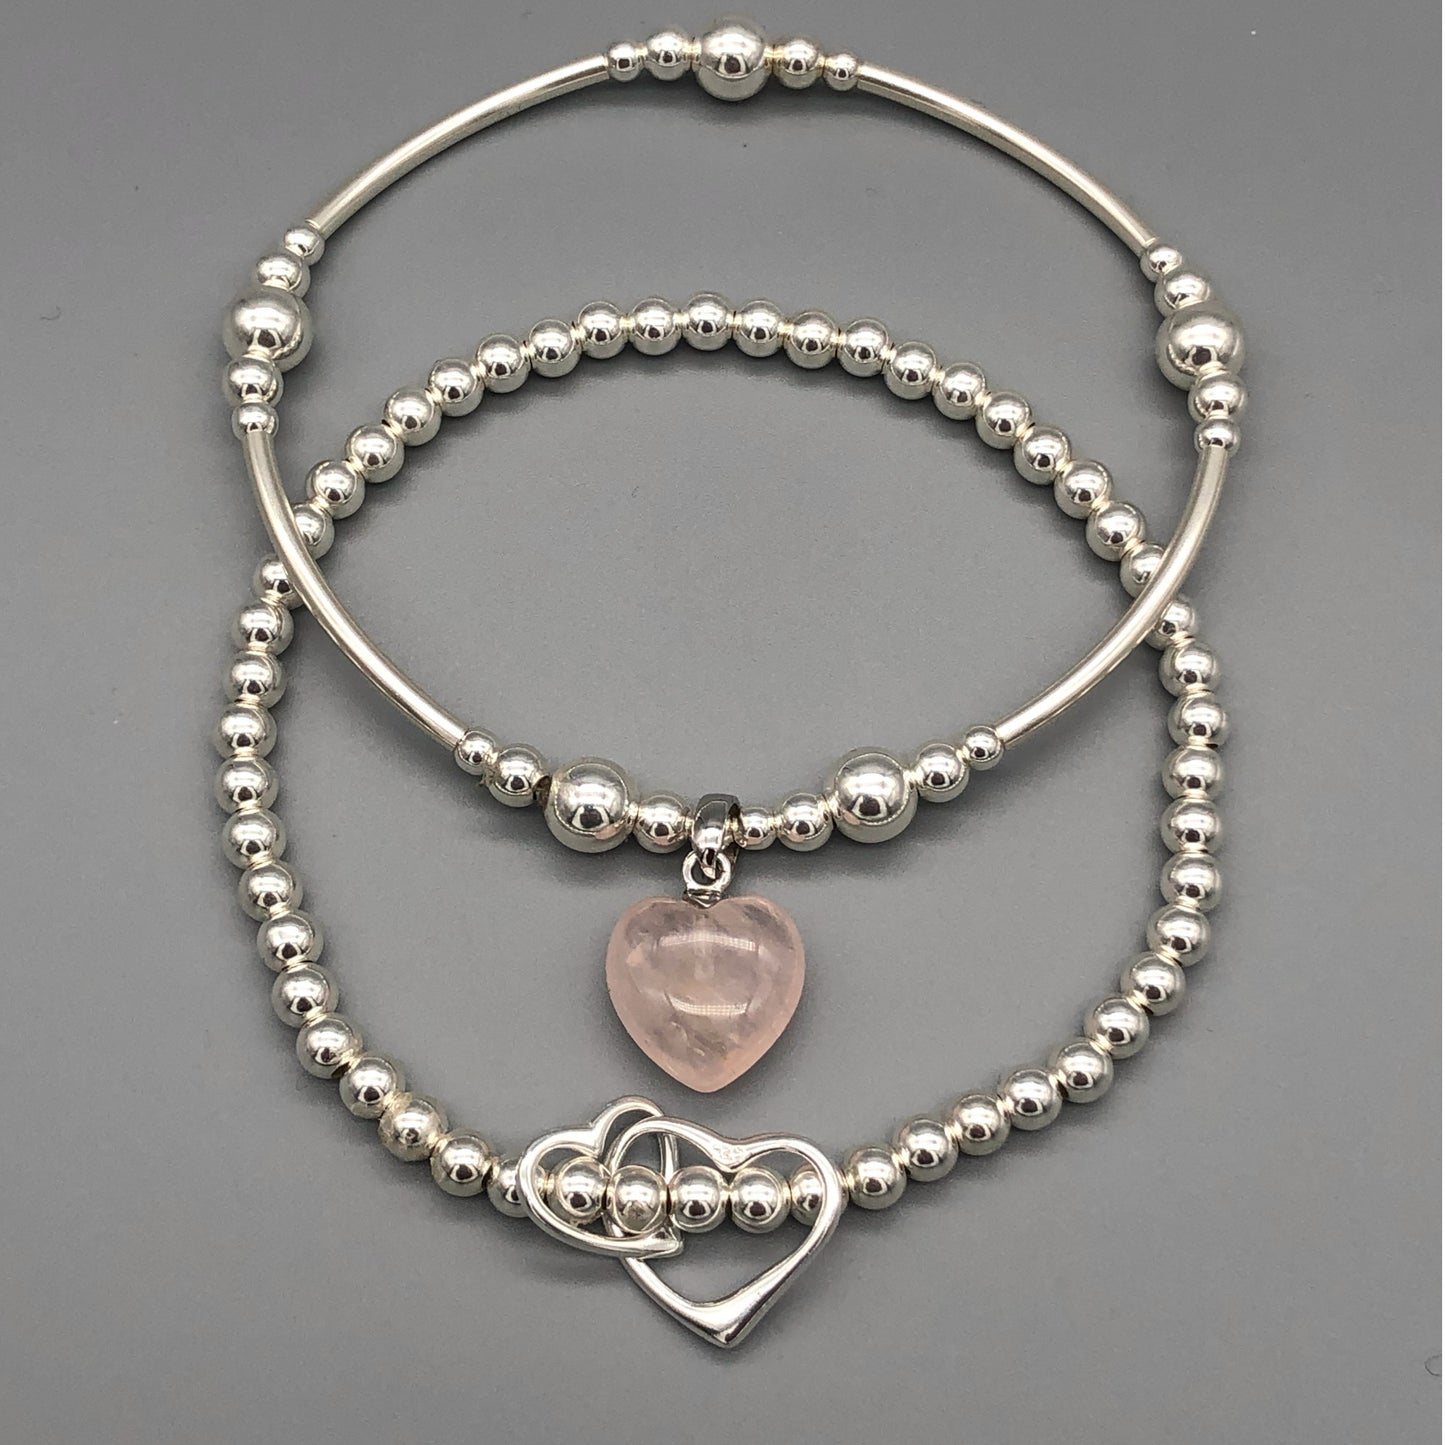 Rose quartz heart & sterling silver twin heart charms women's stacking bracelet set by My Silver Wish